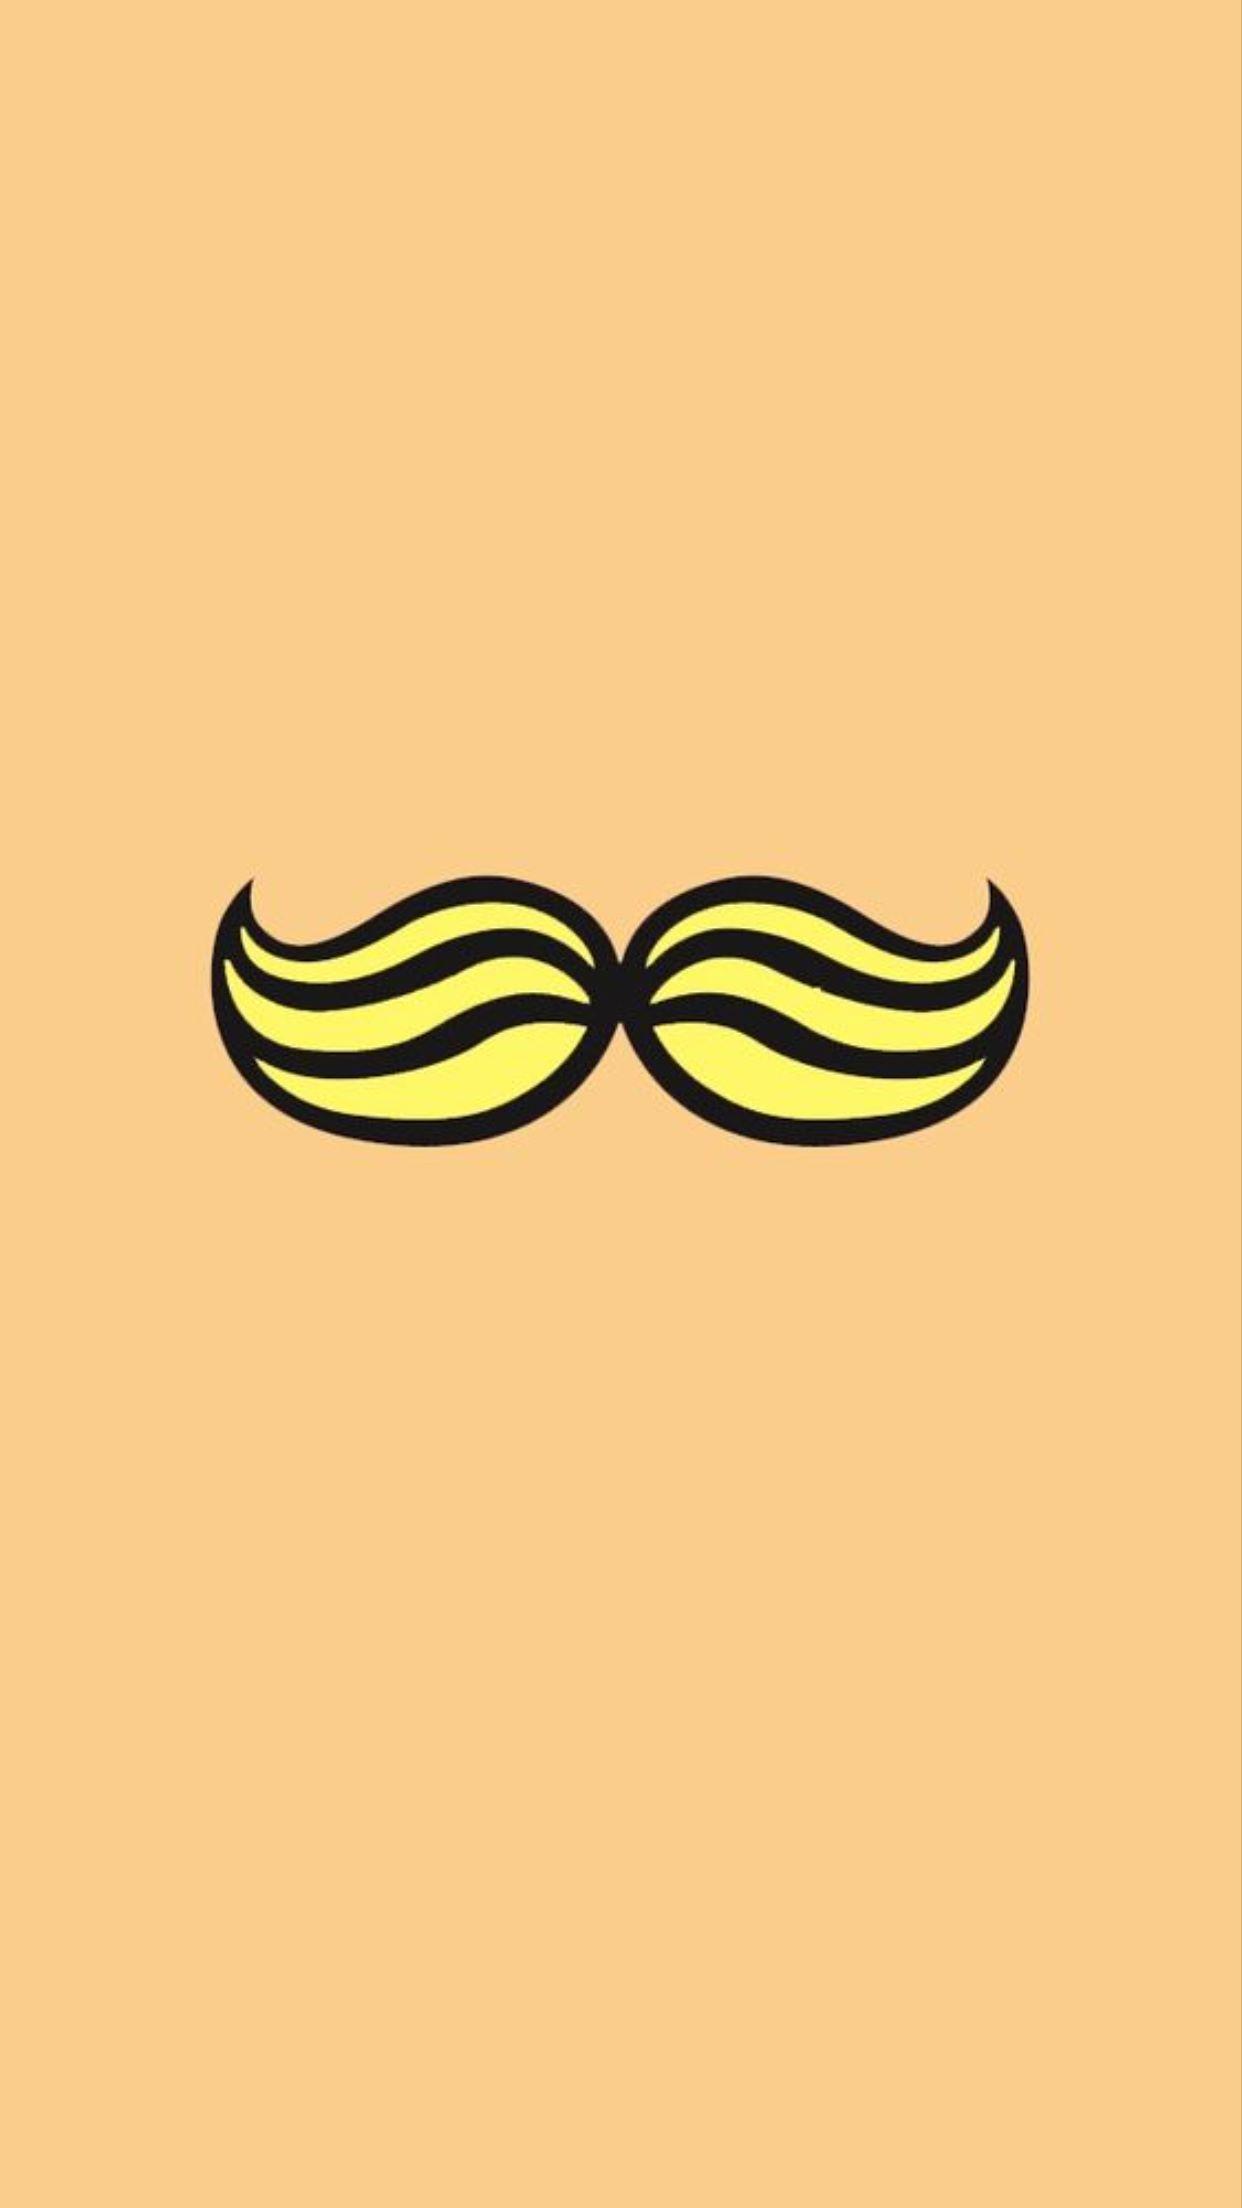 Awesome Mustache Wallpaper for Phones and Walls Mens Stylists. ADD